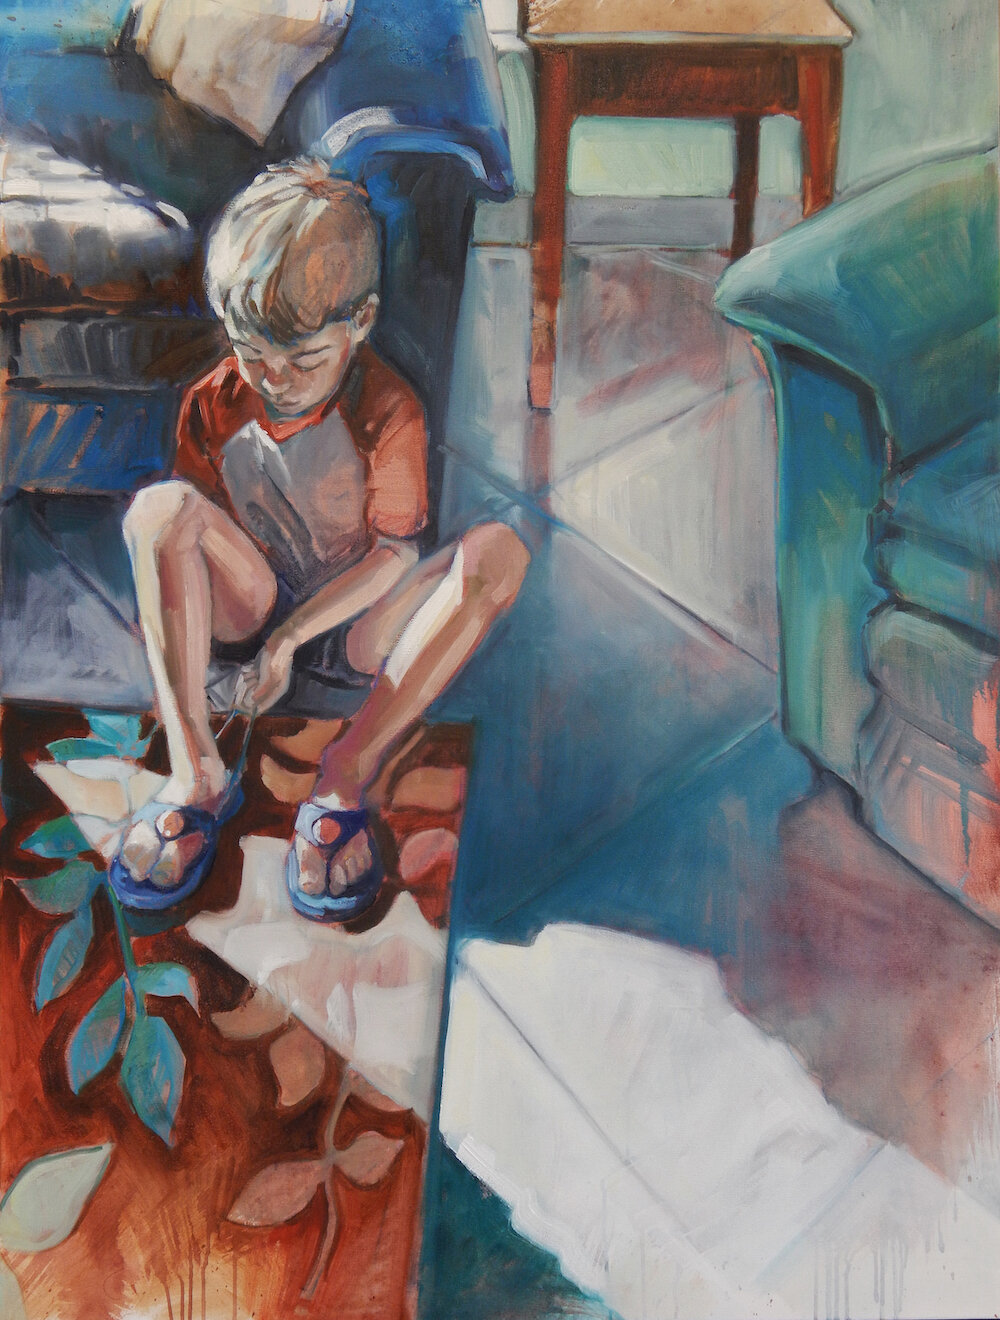    Aiden and the New Flip-Flops  , 48” x 36”, oil on canvas 